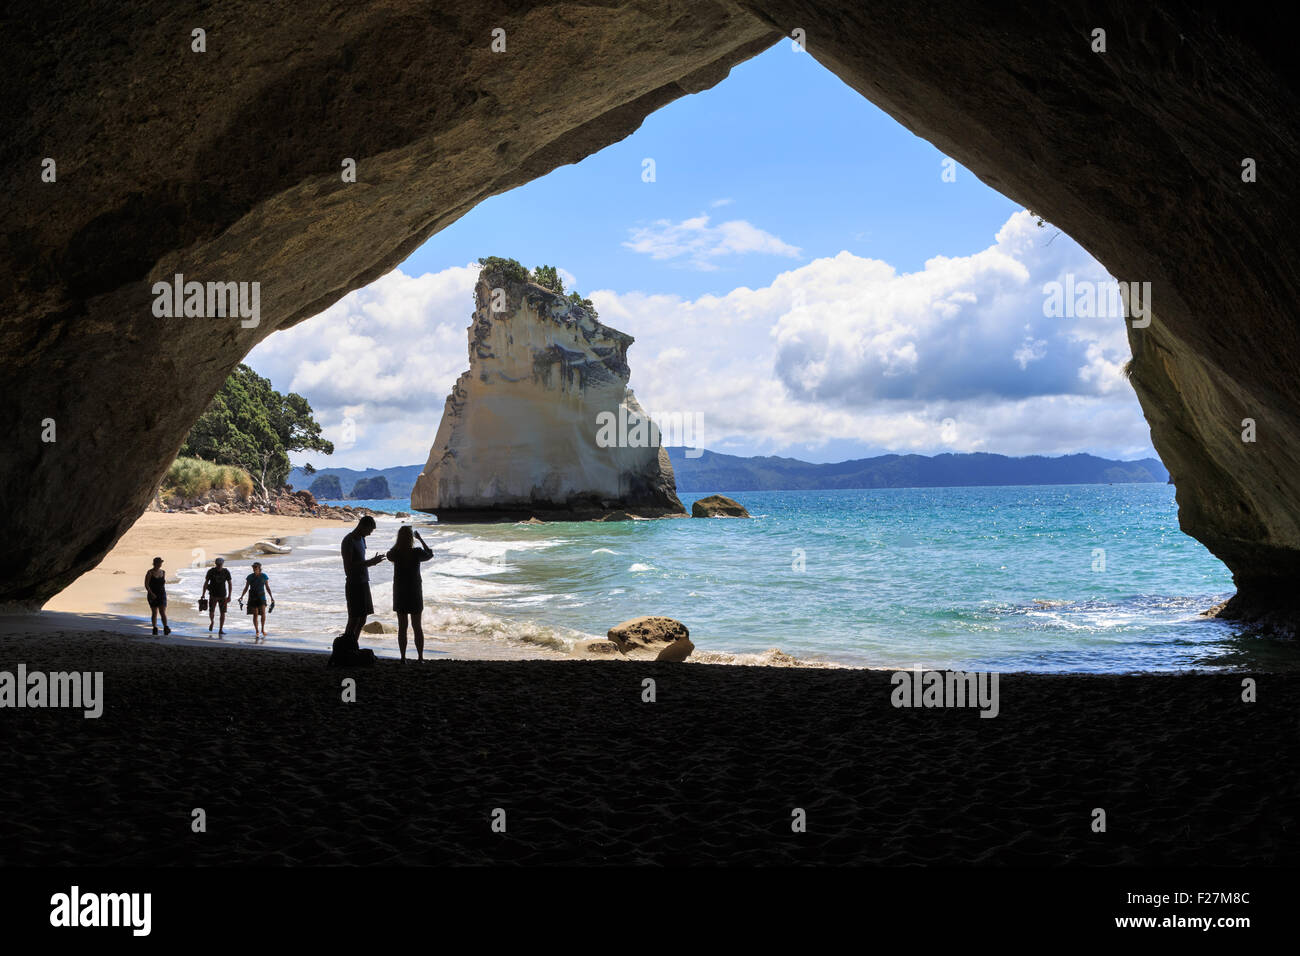 Silhouettes in Cathedral cove, a hole in a rock on the peninsula Coromandel, New Zealand Stock Photo